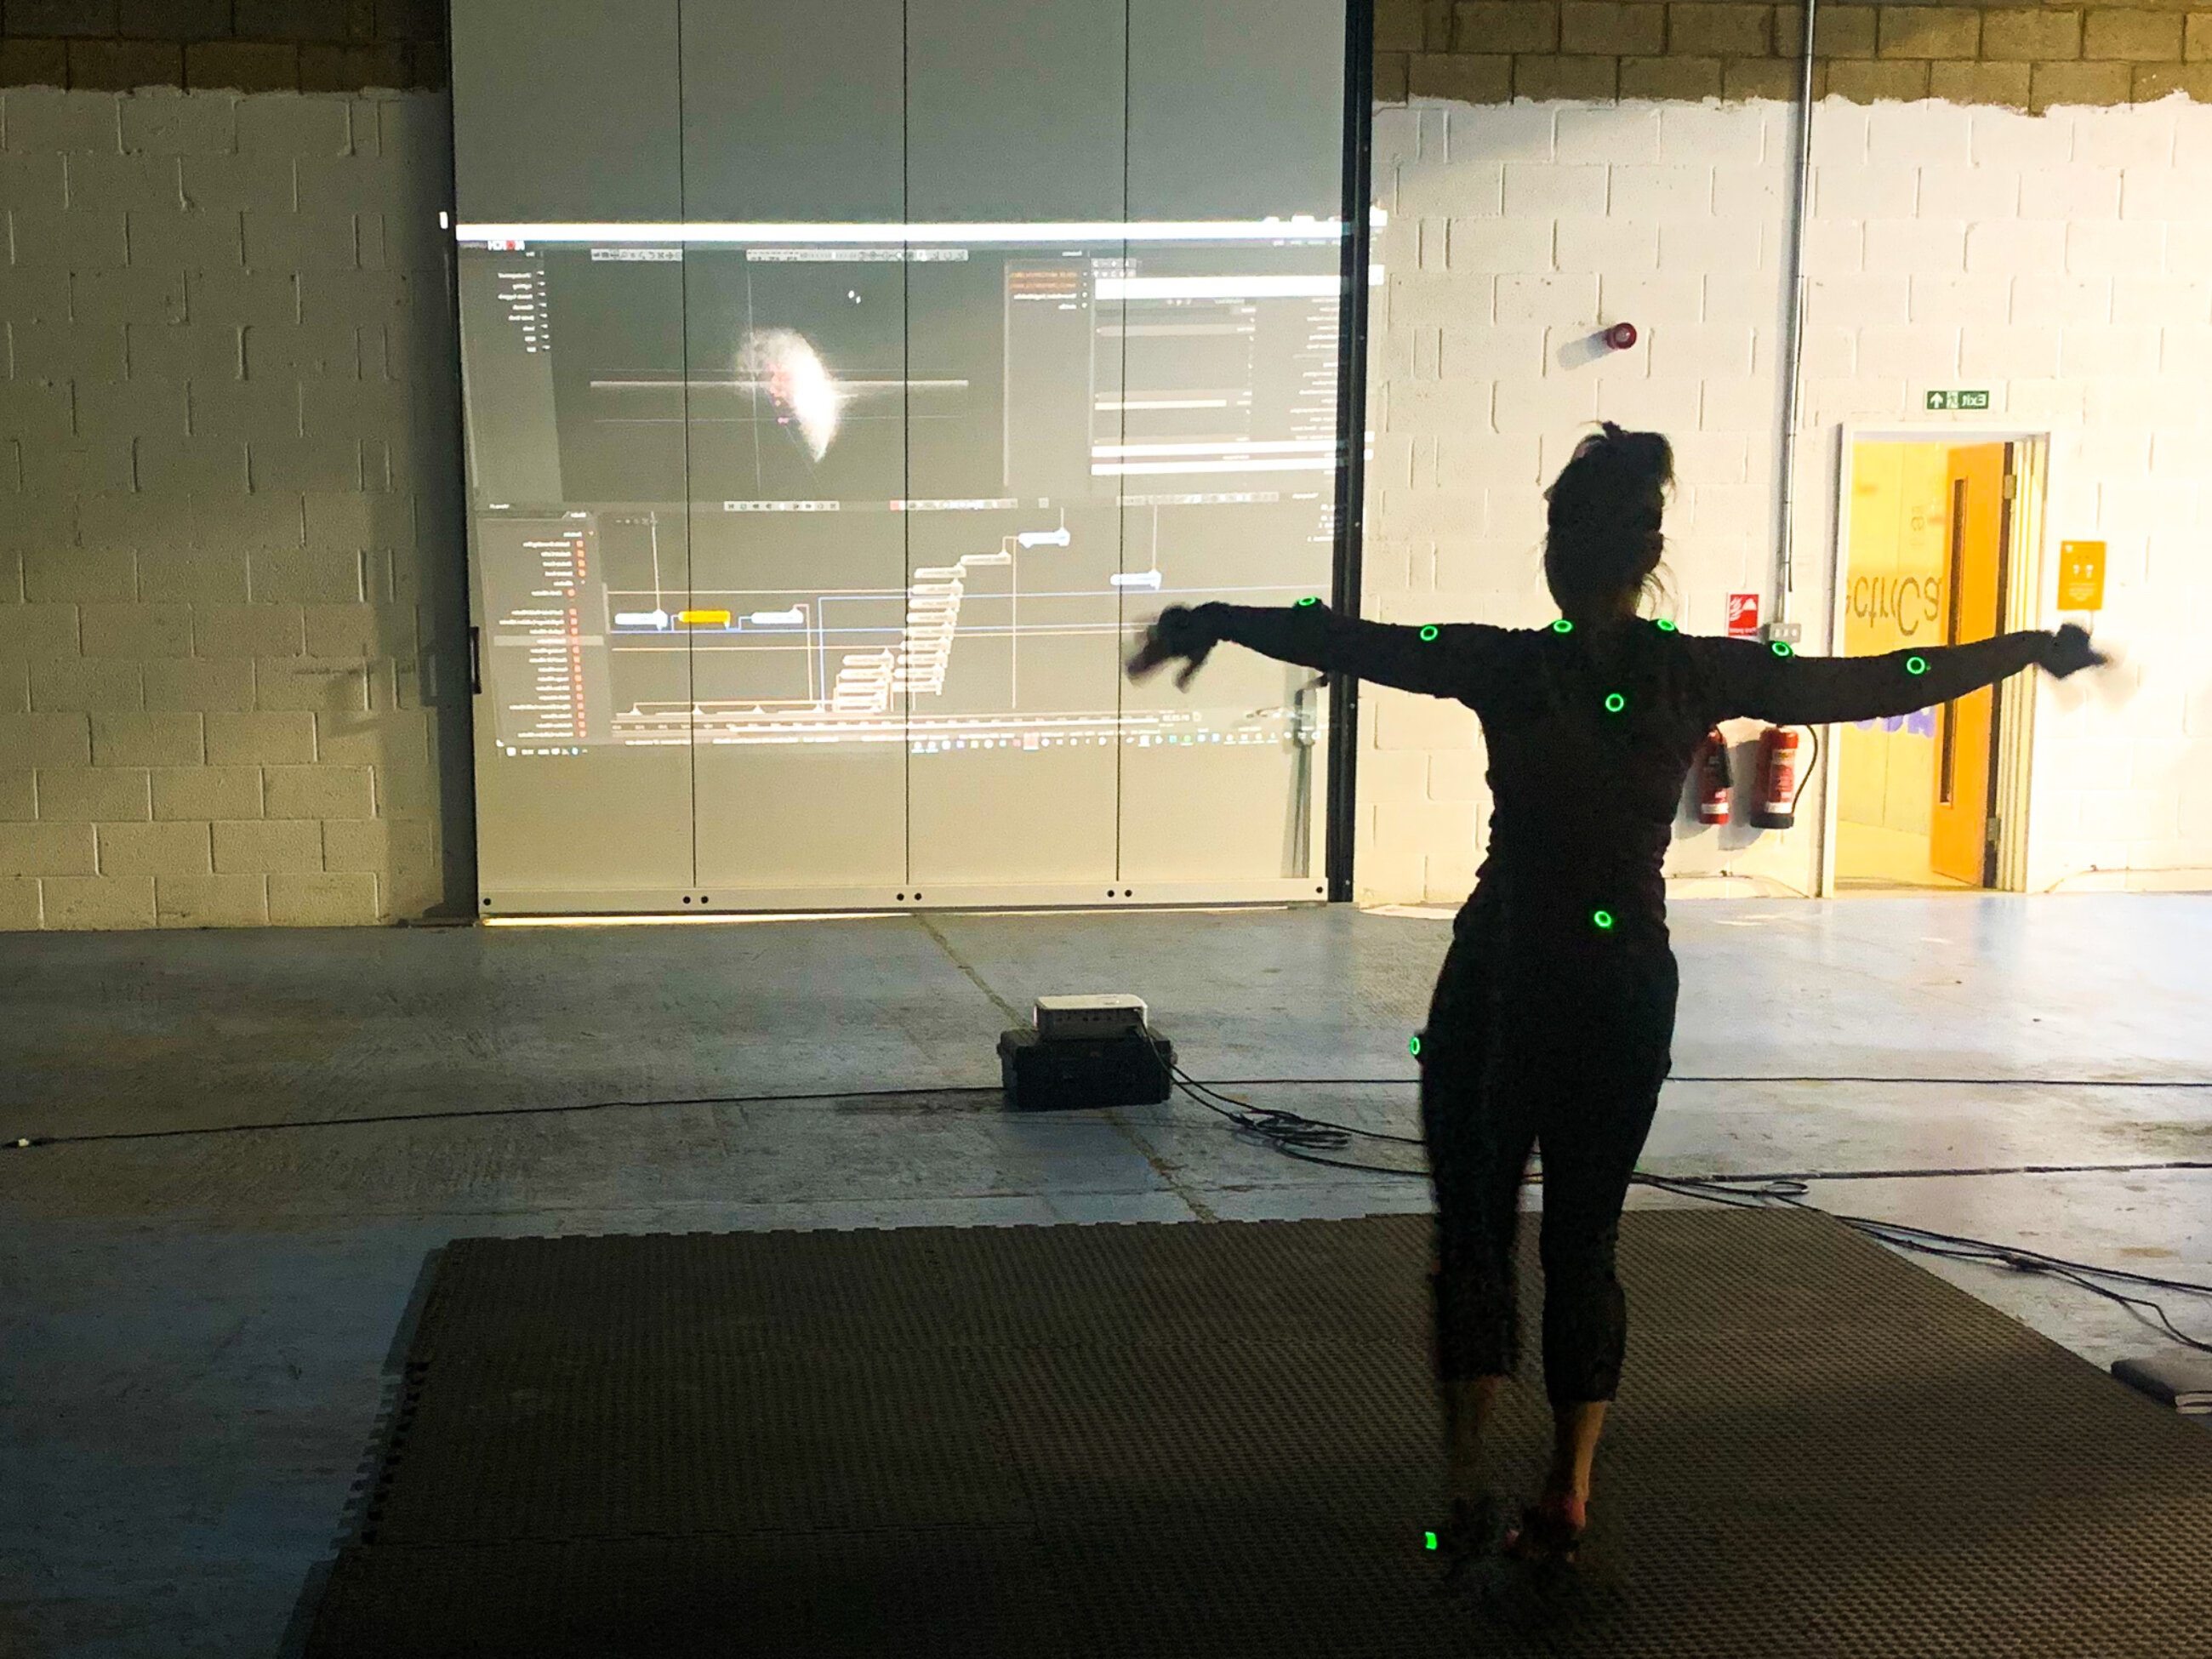 One artist training in the Middle Bay of 101. The artist is facing a projected image on wall of a computer program. The artist is wearing an outfit with sensors on and holds their arms out strait at shoulder length.